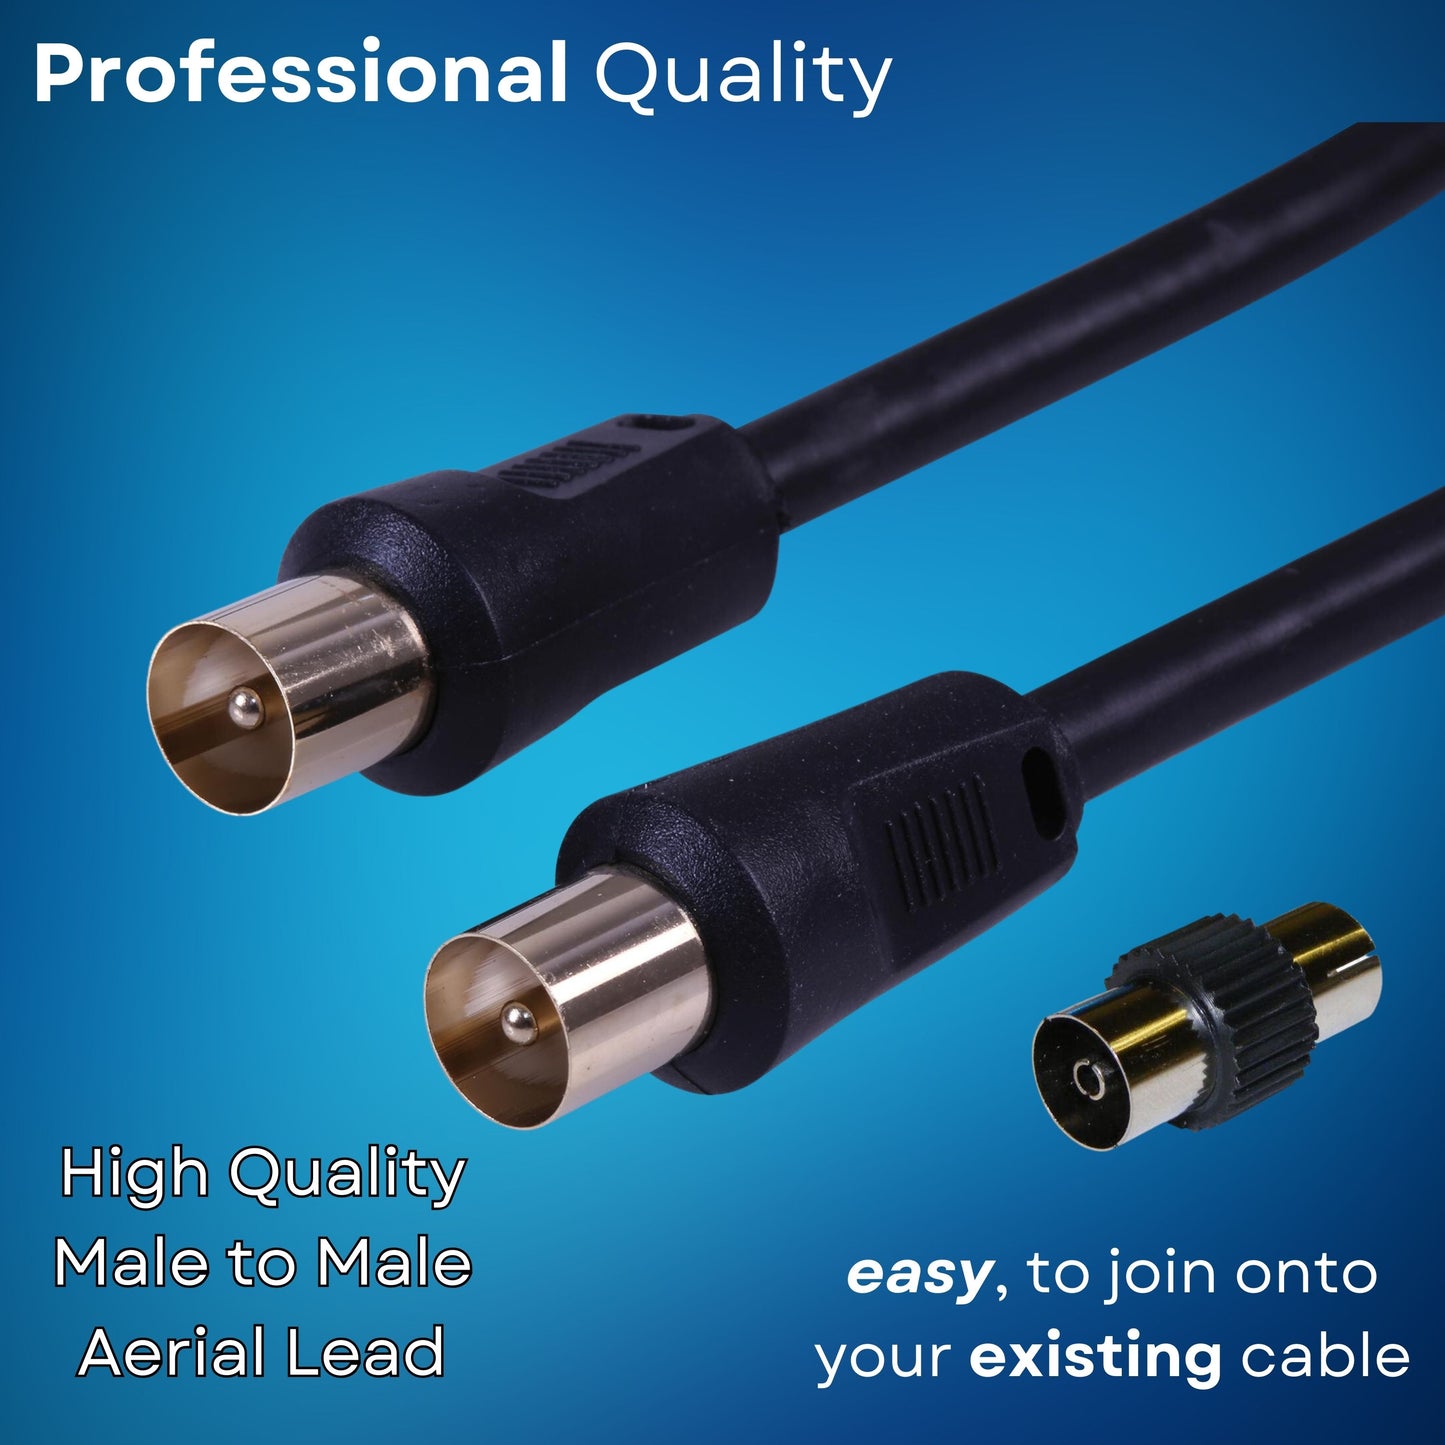 TV Aerial Coaxial Cable Male to Male - 75 Ohm, Shielded Connectors, Gold Plated for Satellite, Digital TV, and Antenna Black